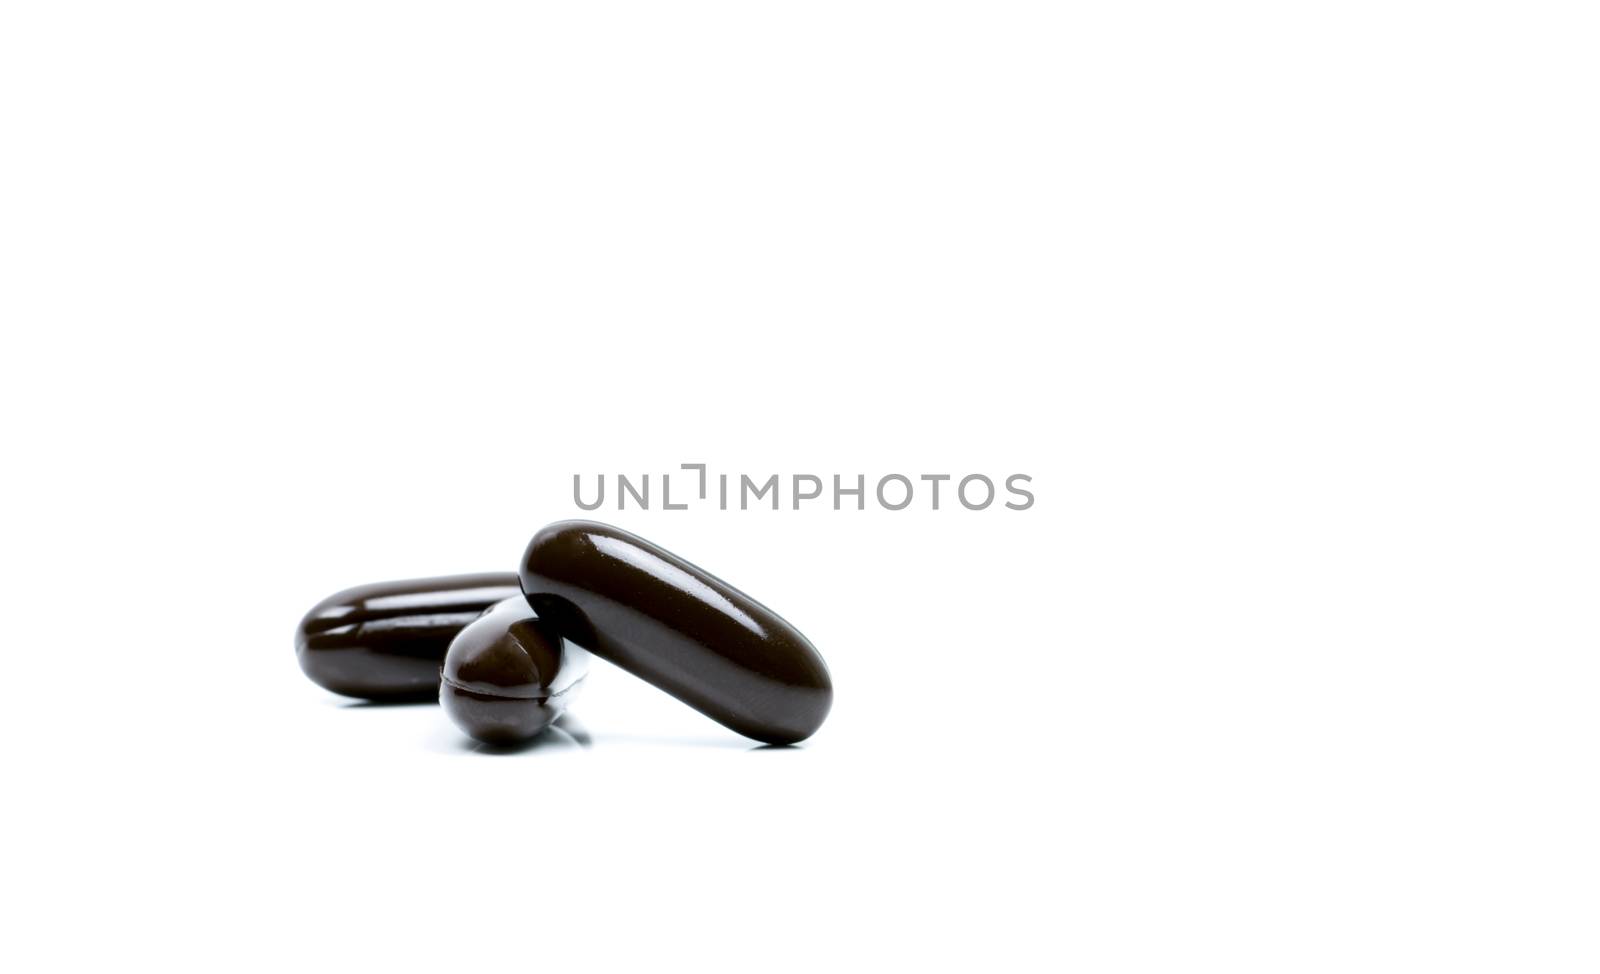 Multivitamins capsule pills for pregnant woman with copy space for text isolated on white background. Vitamins and supplements for hard working guy. Global healthcare concept. Pharmaceutical industry. Pharmacy background. Health budgets and policy.